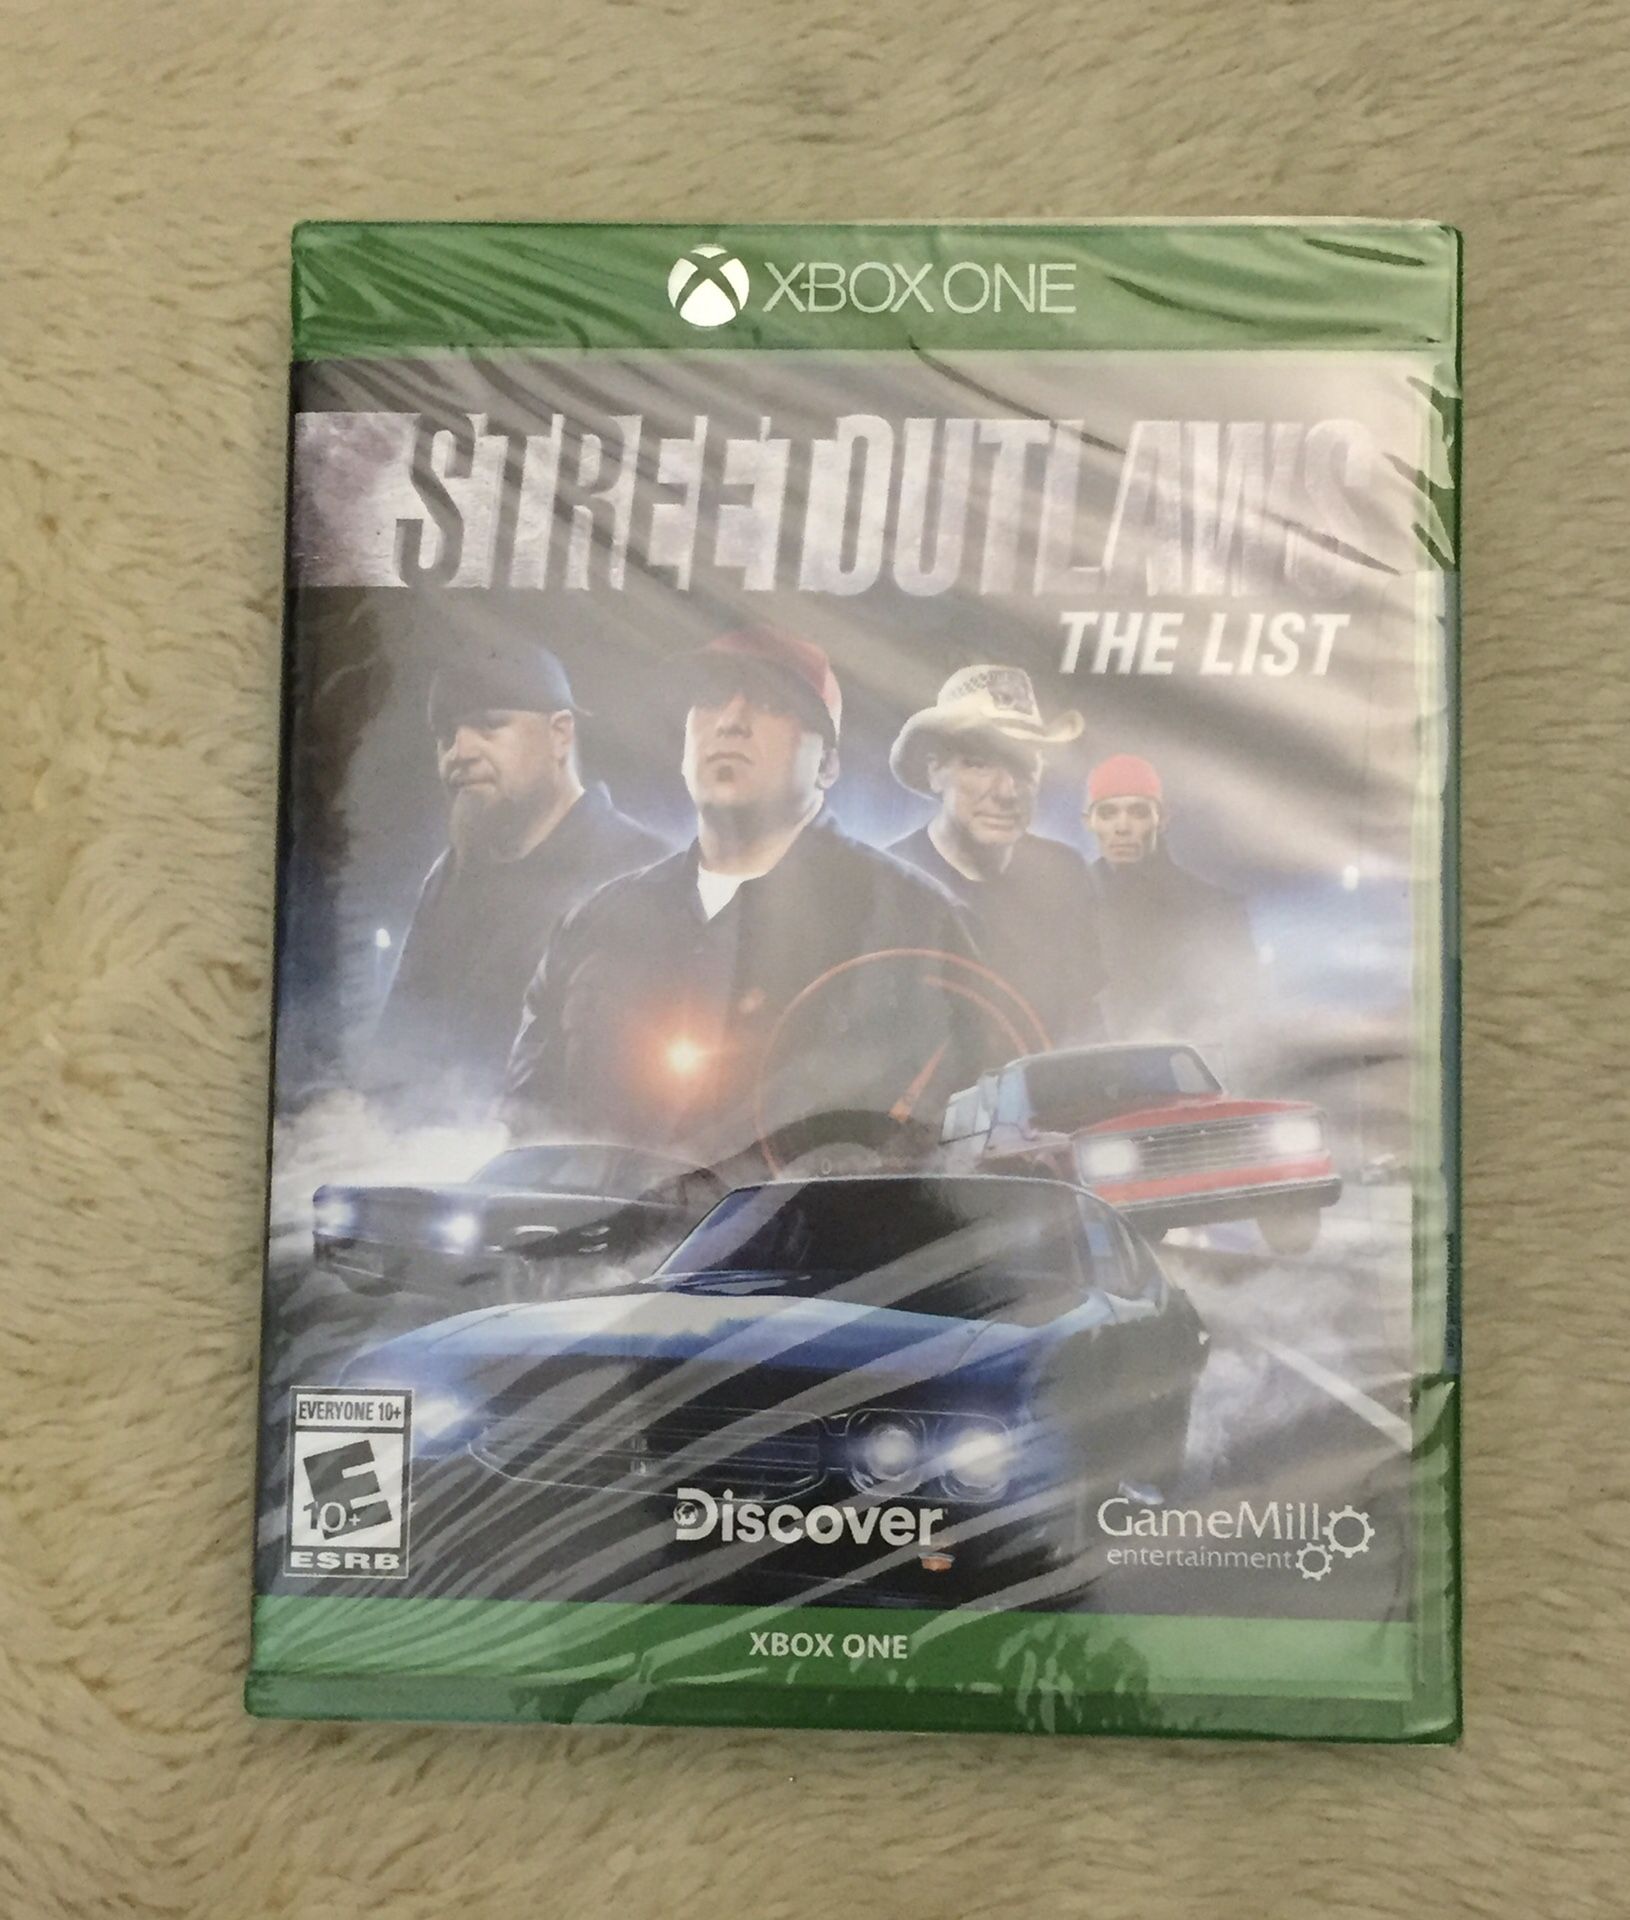 Street Outlaws The List - Xbox One